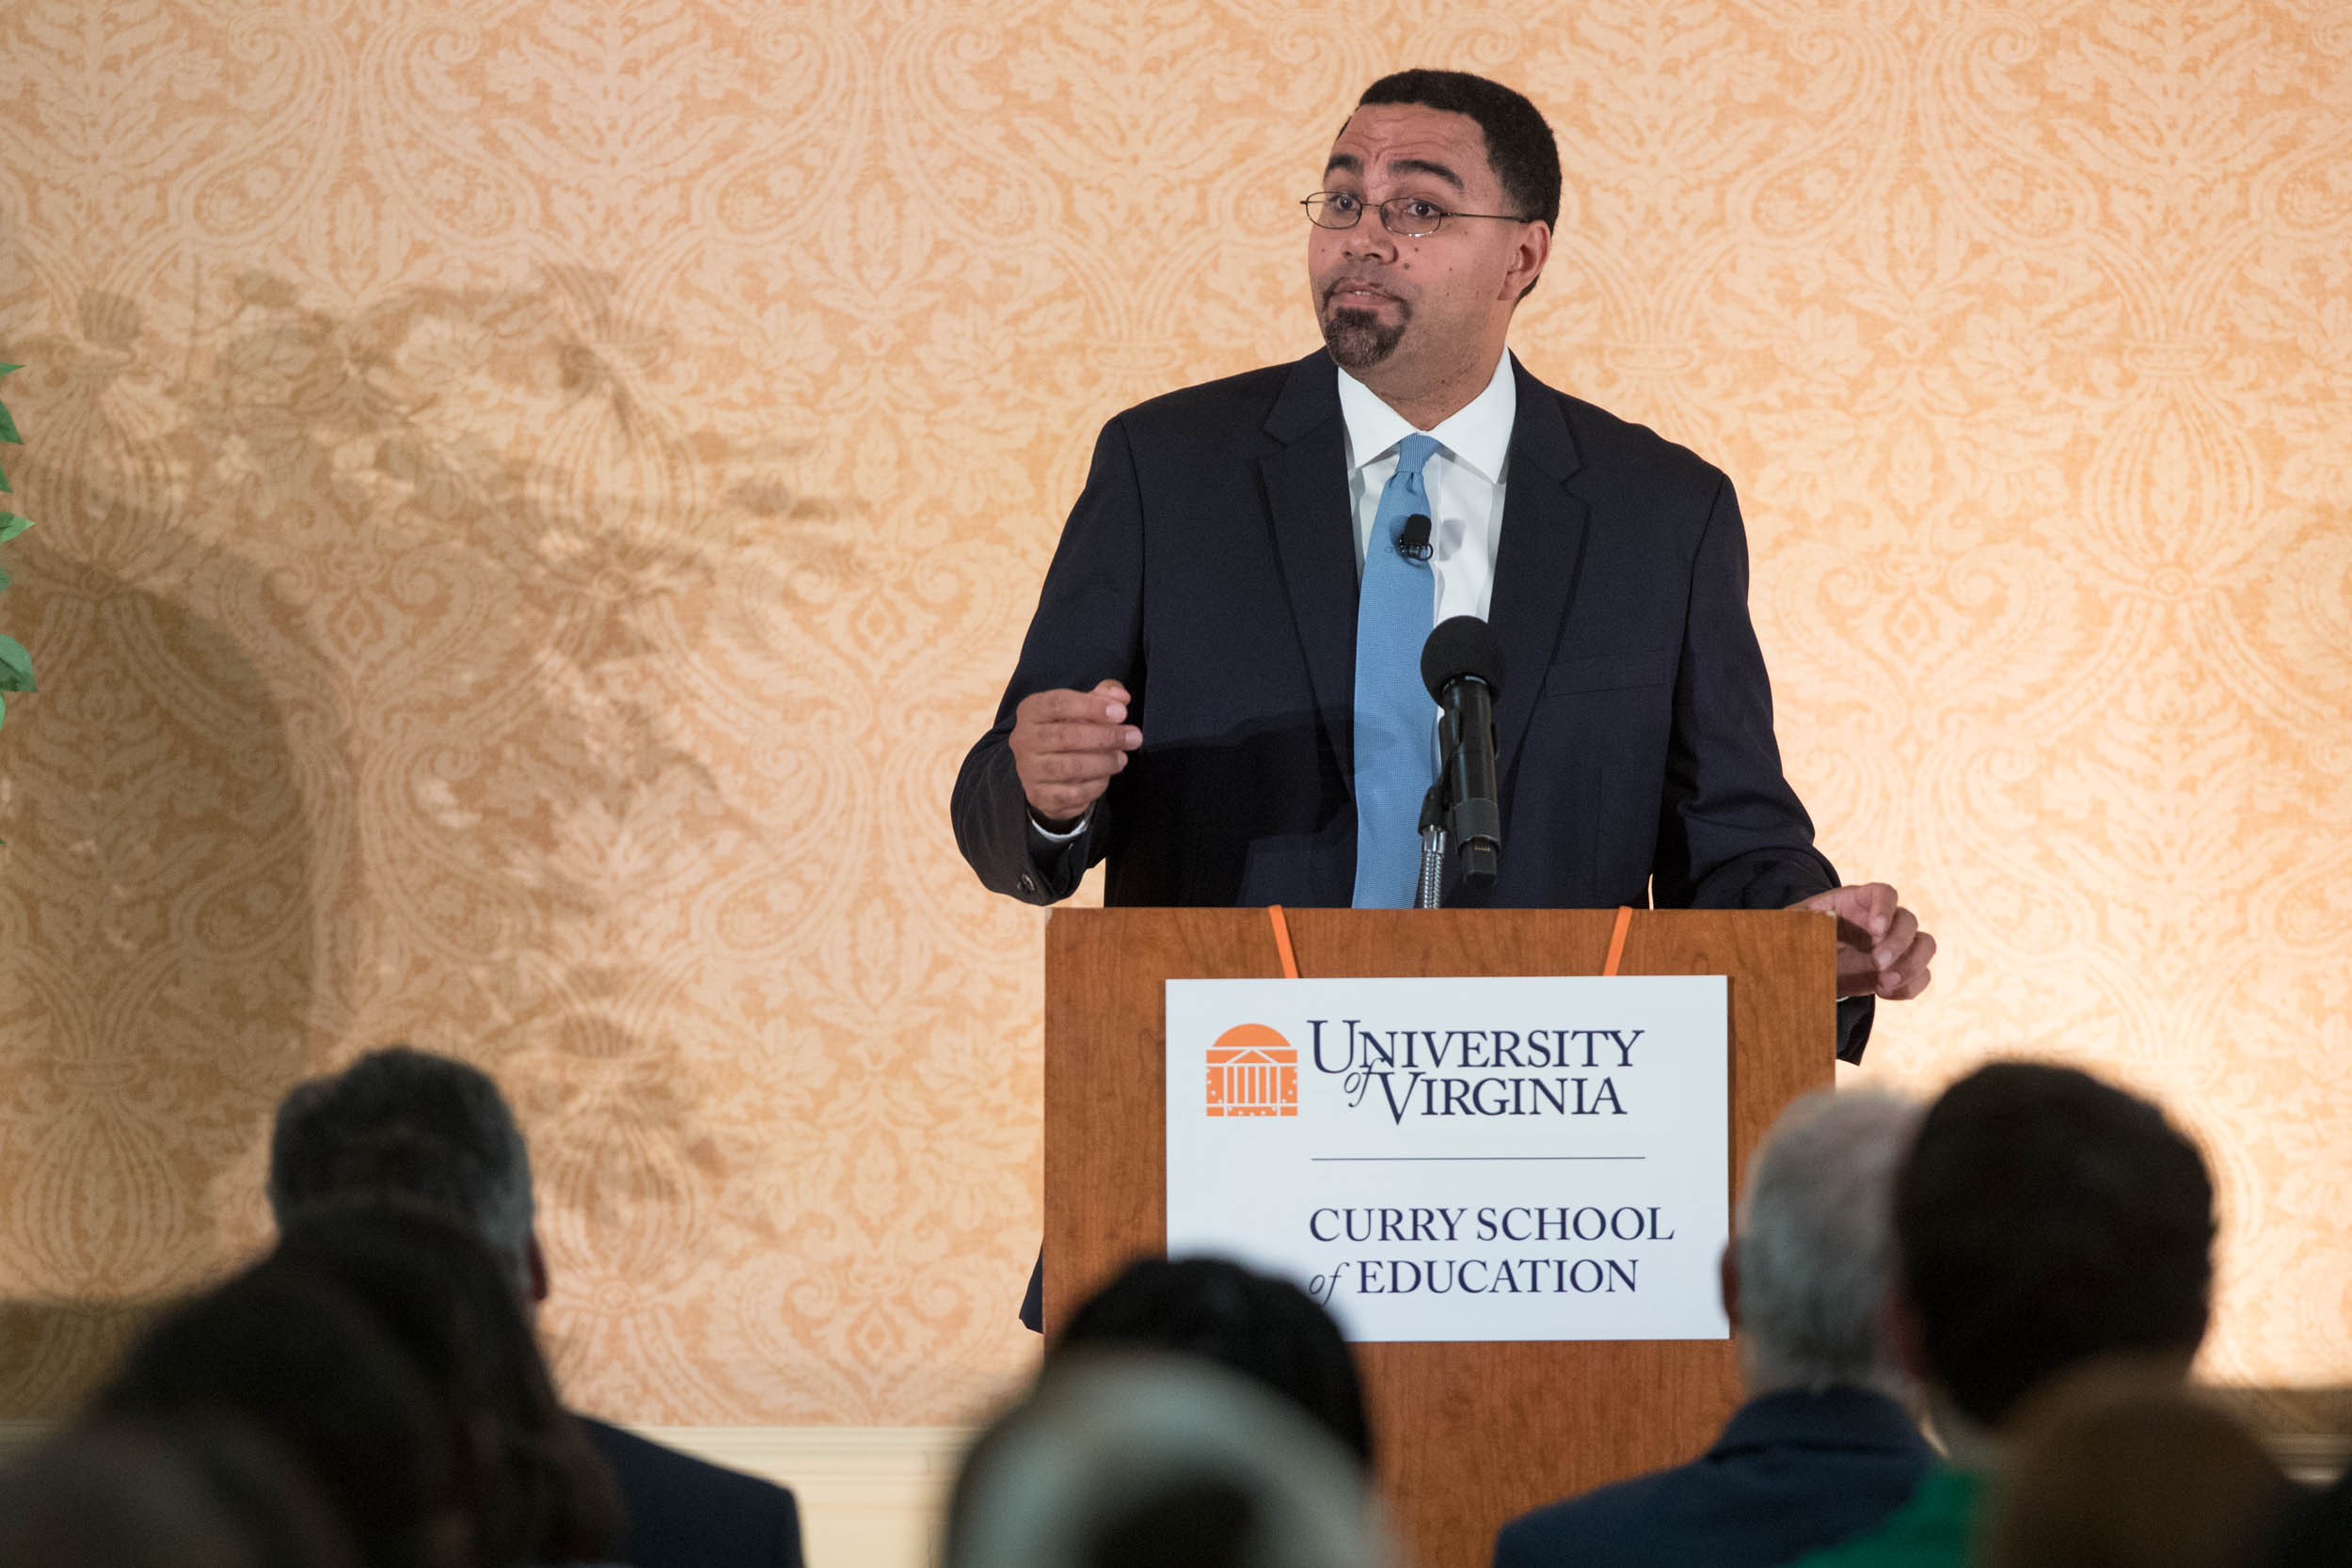 U.S. Secretary of Education John B. King Jr. speaking from a podium to a crowd